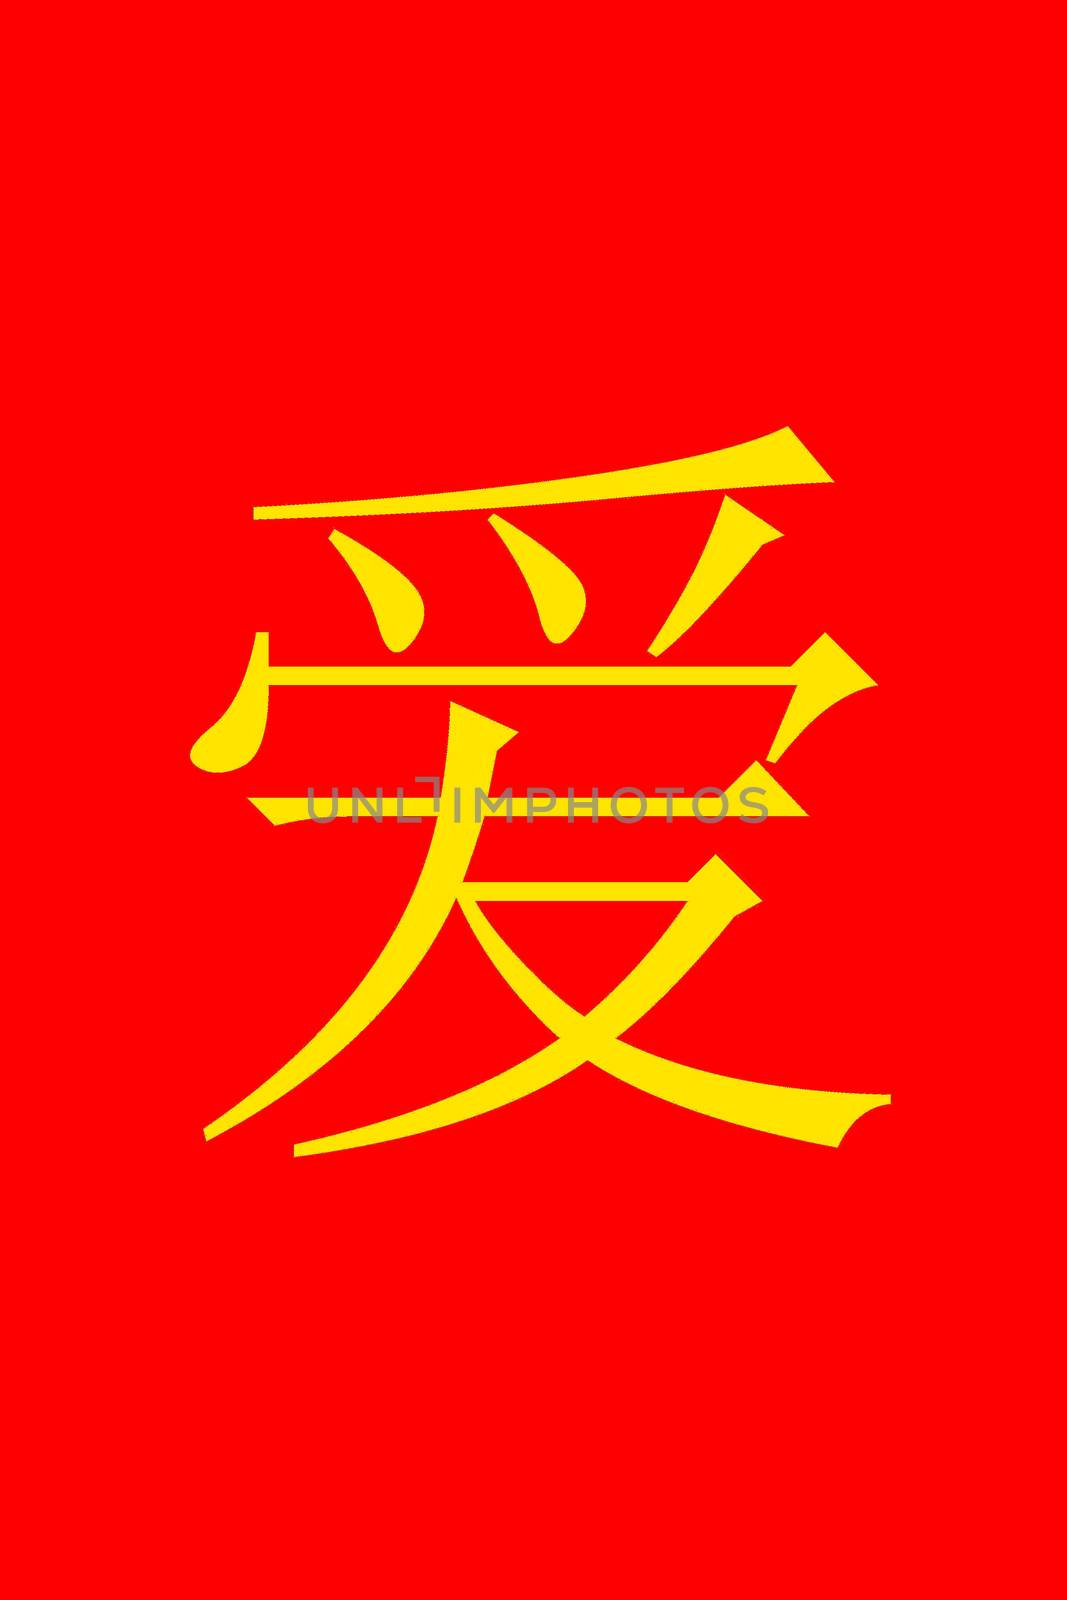 Chinese character LOVE in gold on red background.